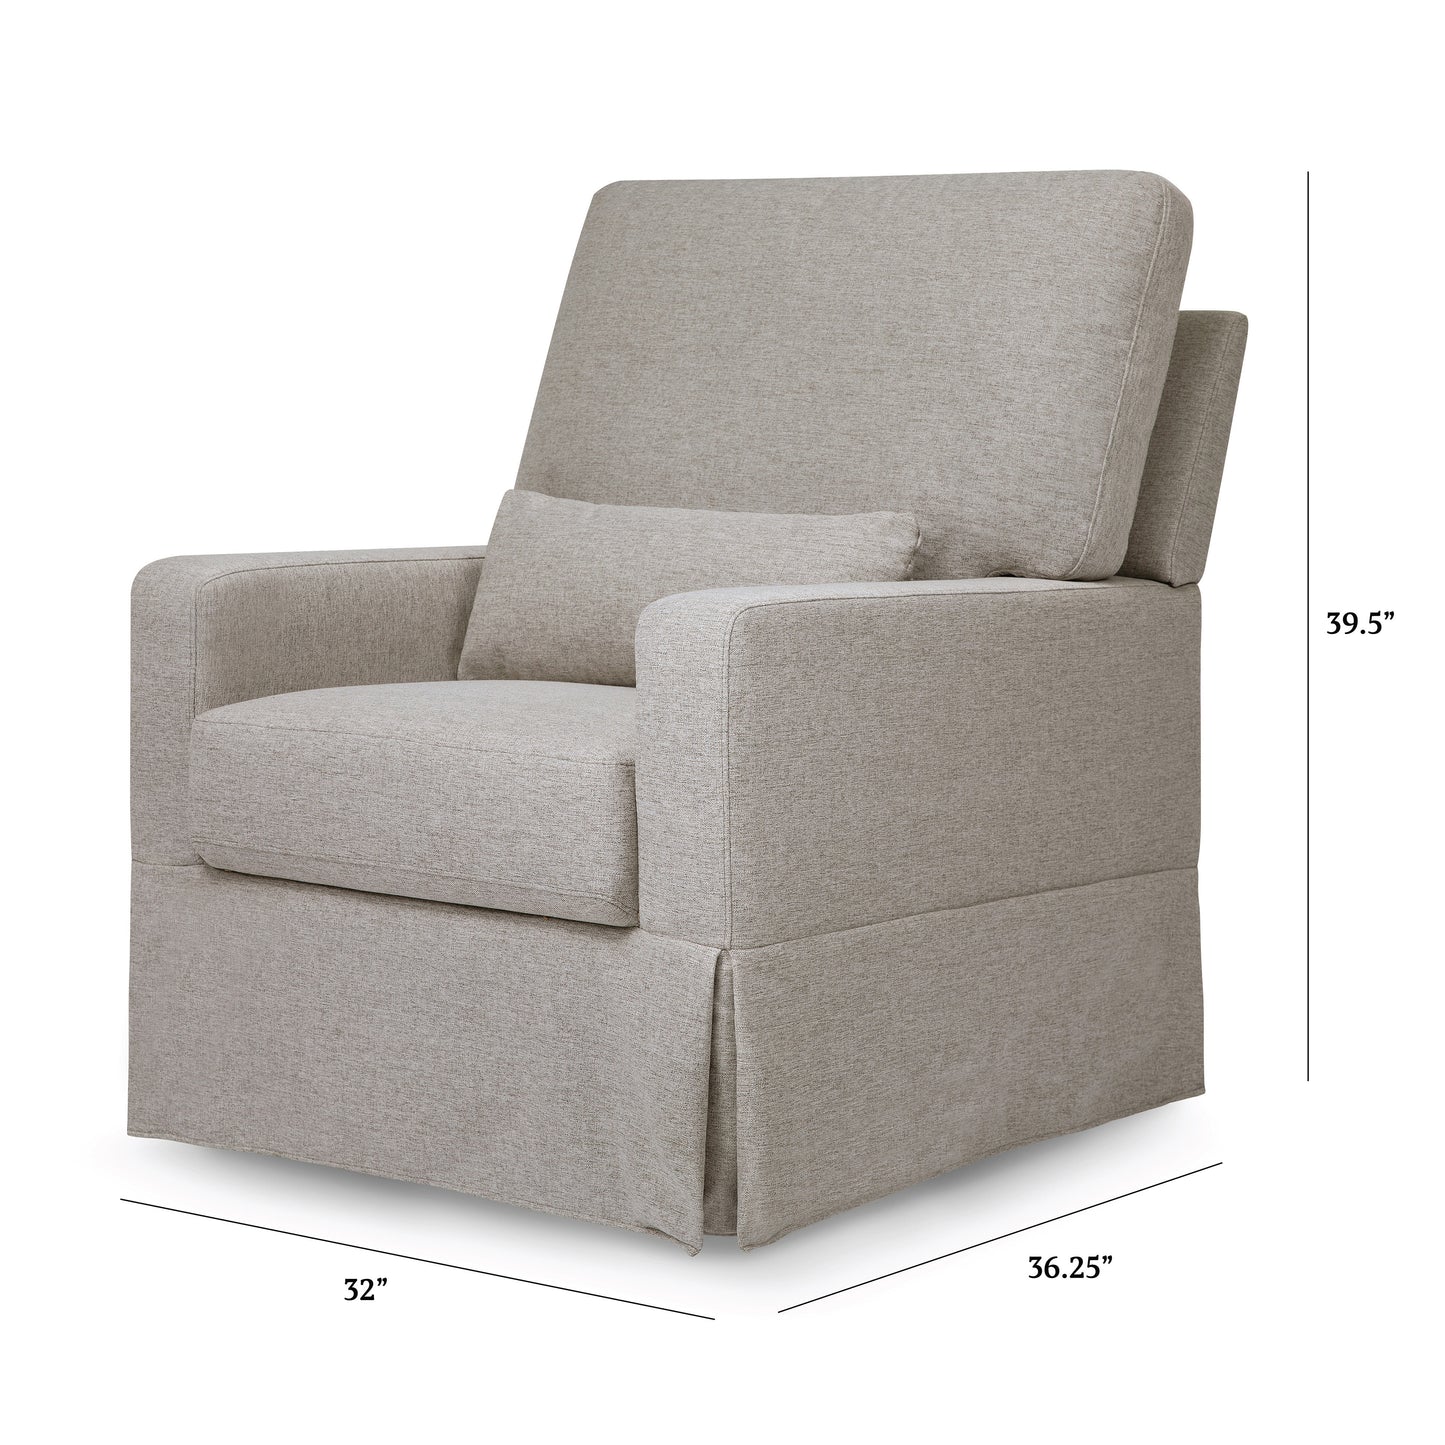 M21787PGEW,Crawford Pillowback Comfort Swivel Glider in Performance Grey Eco-Weave